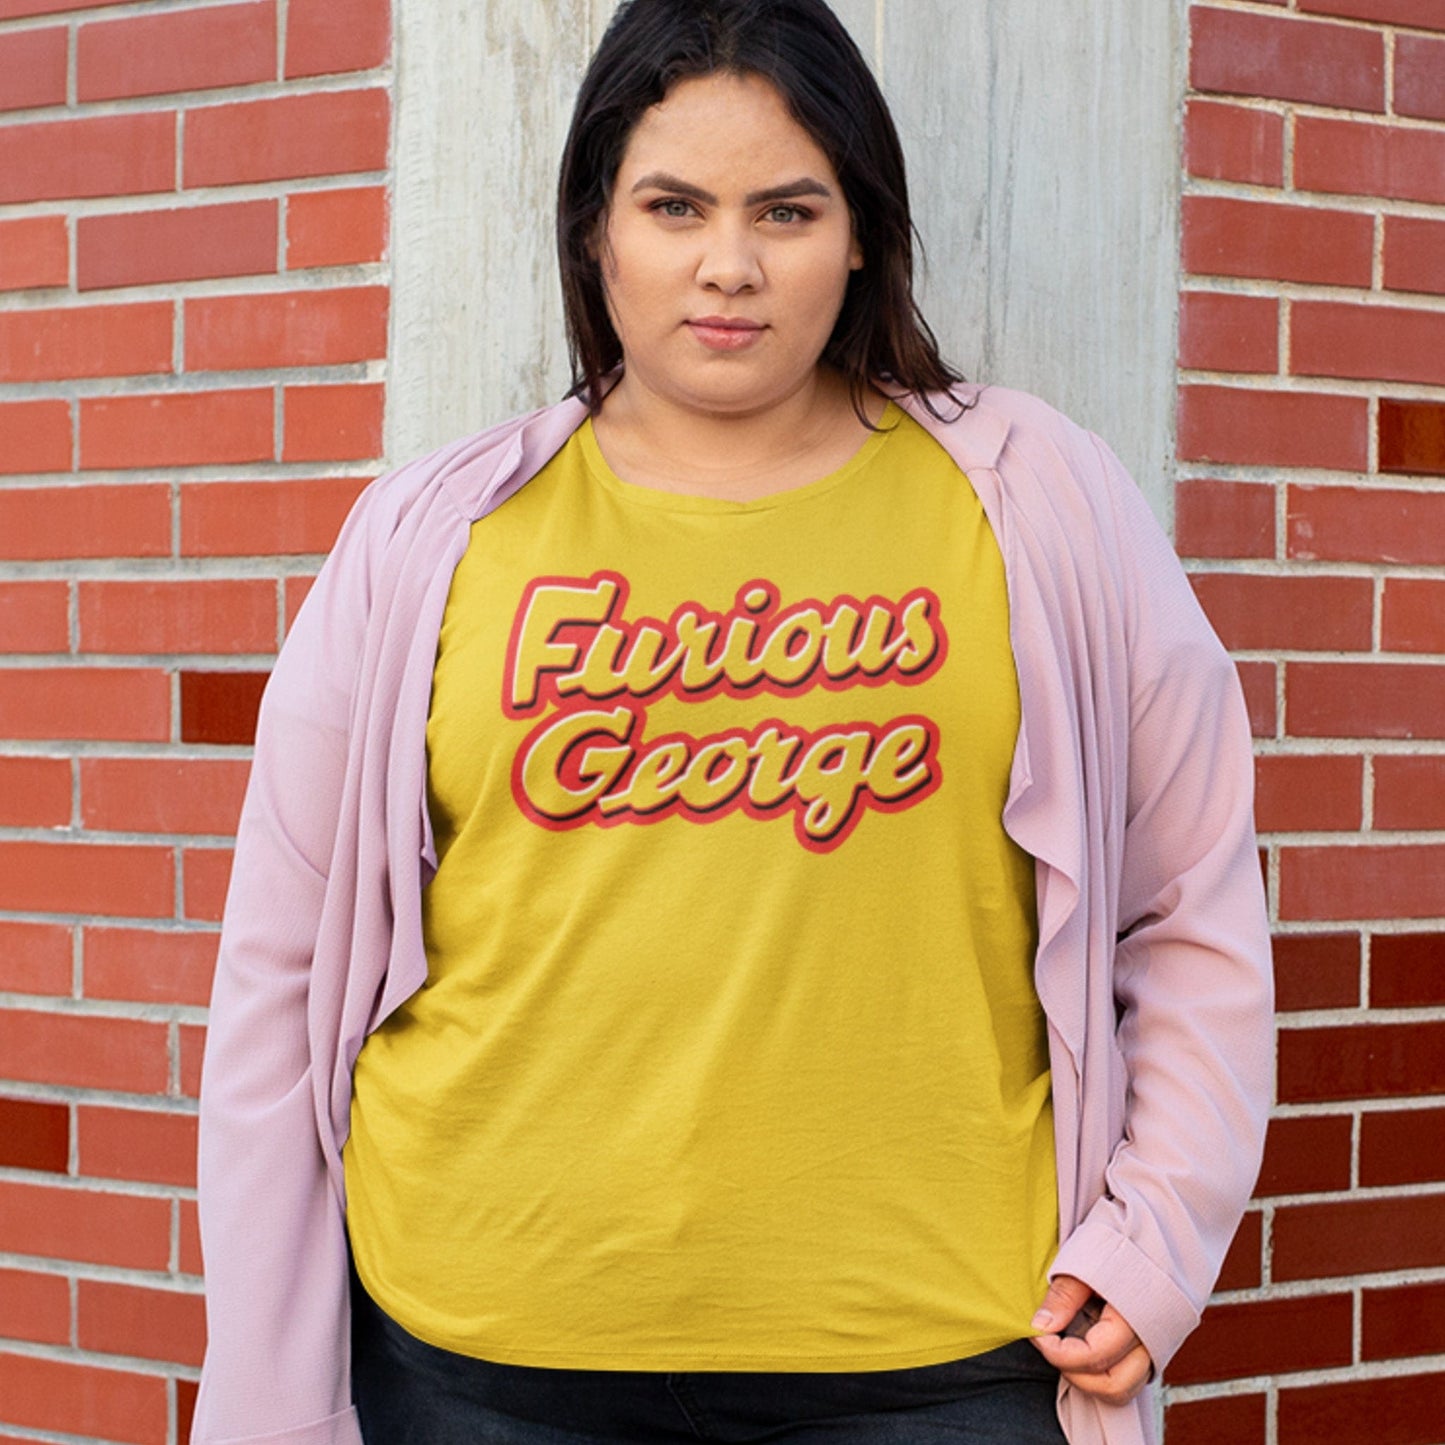 KC Swag | Kansas City Chiefs red & white FURIOUS GEORGE on maize yellow unisex t-shirt worn by plus-sized female model leaning on corner of brick building